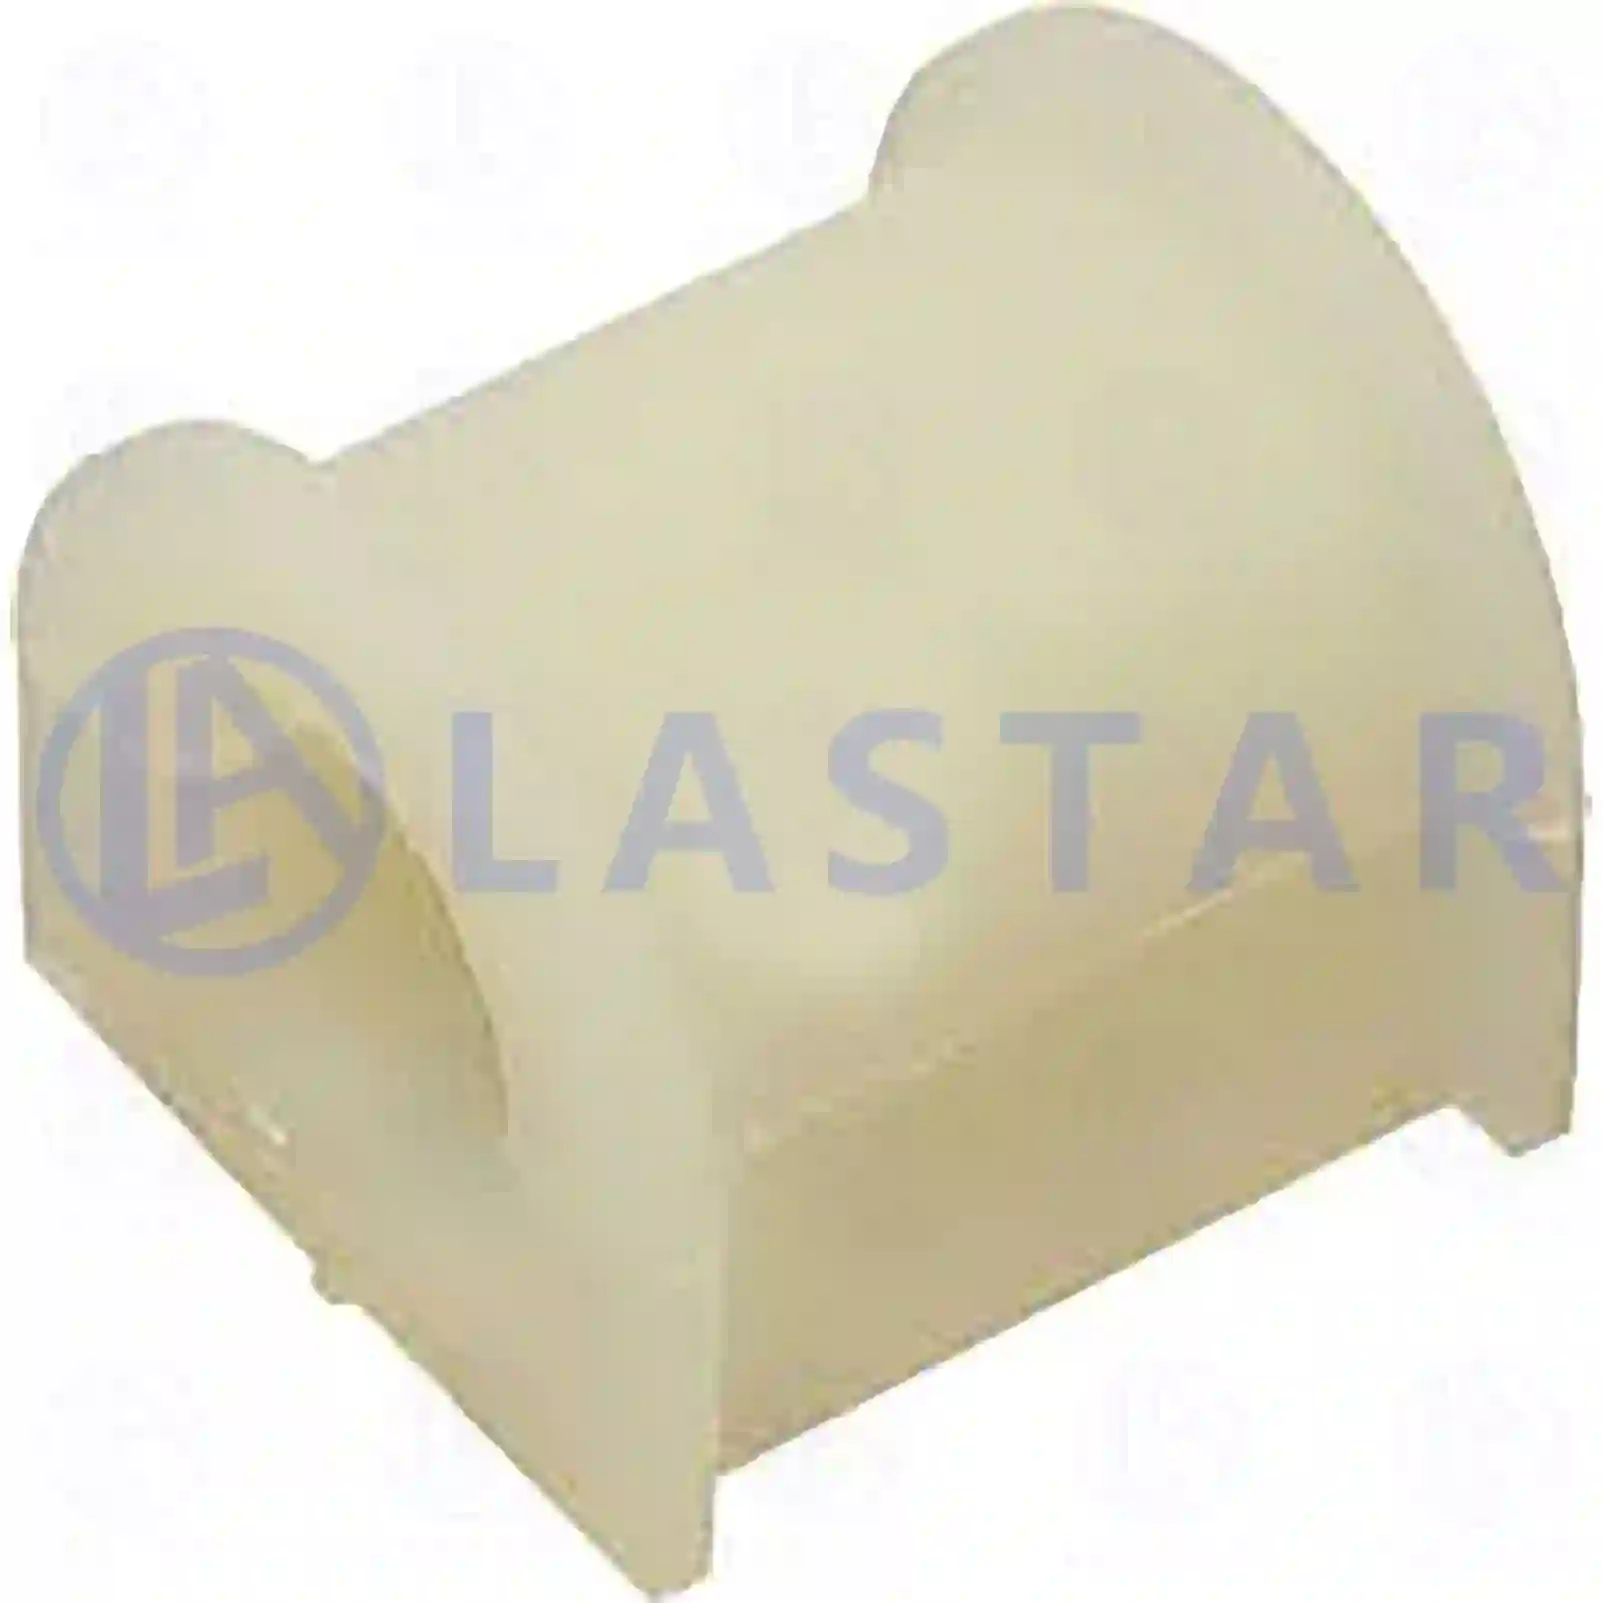 Bushing, stabilizer, 77728377, 4849258, 4849258 ||  77728377 Lastar Spare Part | Truck Spare Parts, Auotomotive Spare Parts Bushing, stabilizer, 77728377, 4849258, 4849258 ||  77728377 Lastar Spare Part | Truck Spare Parts, Auotomotive Spare Parts